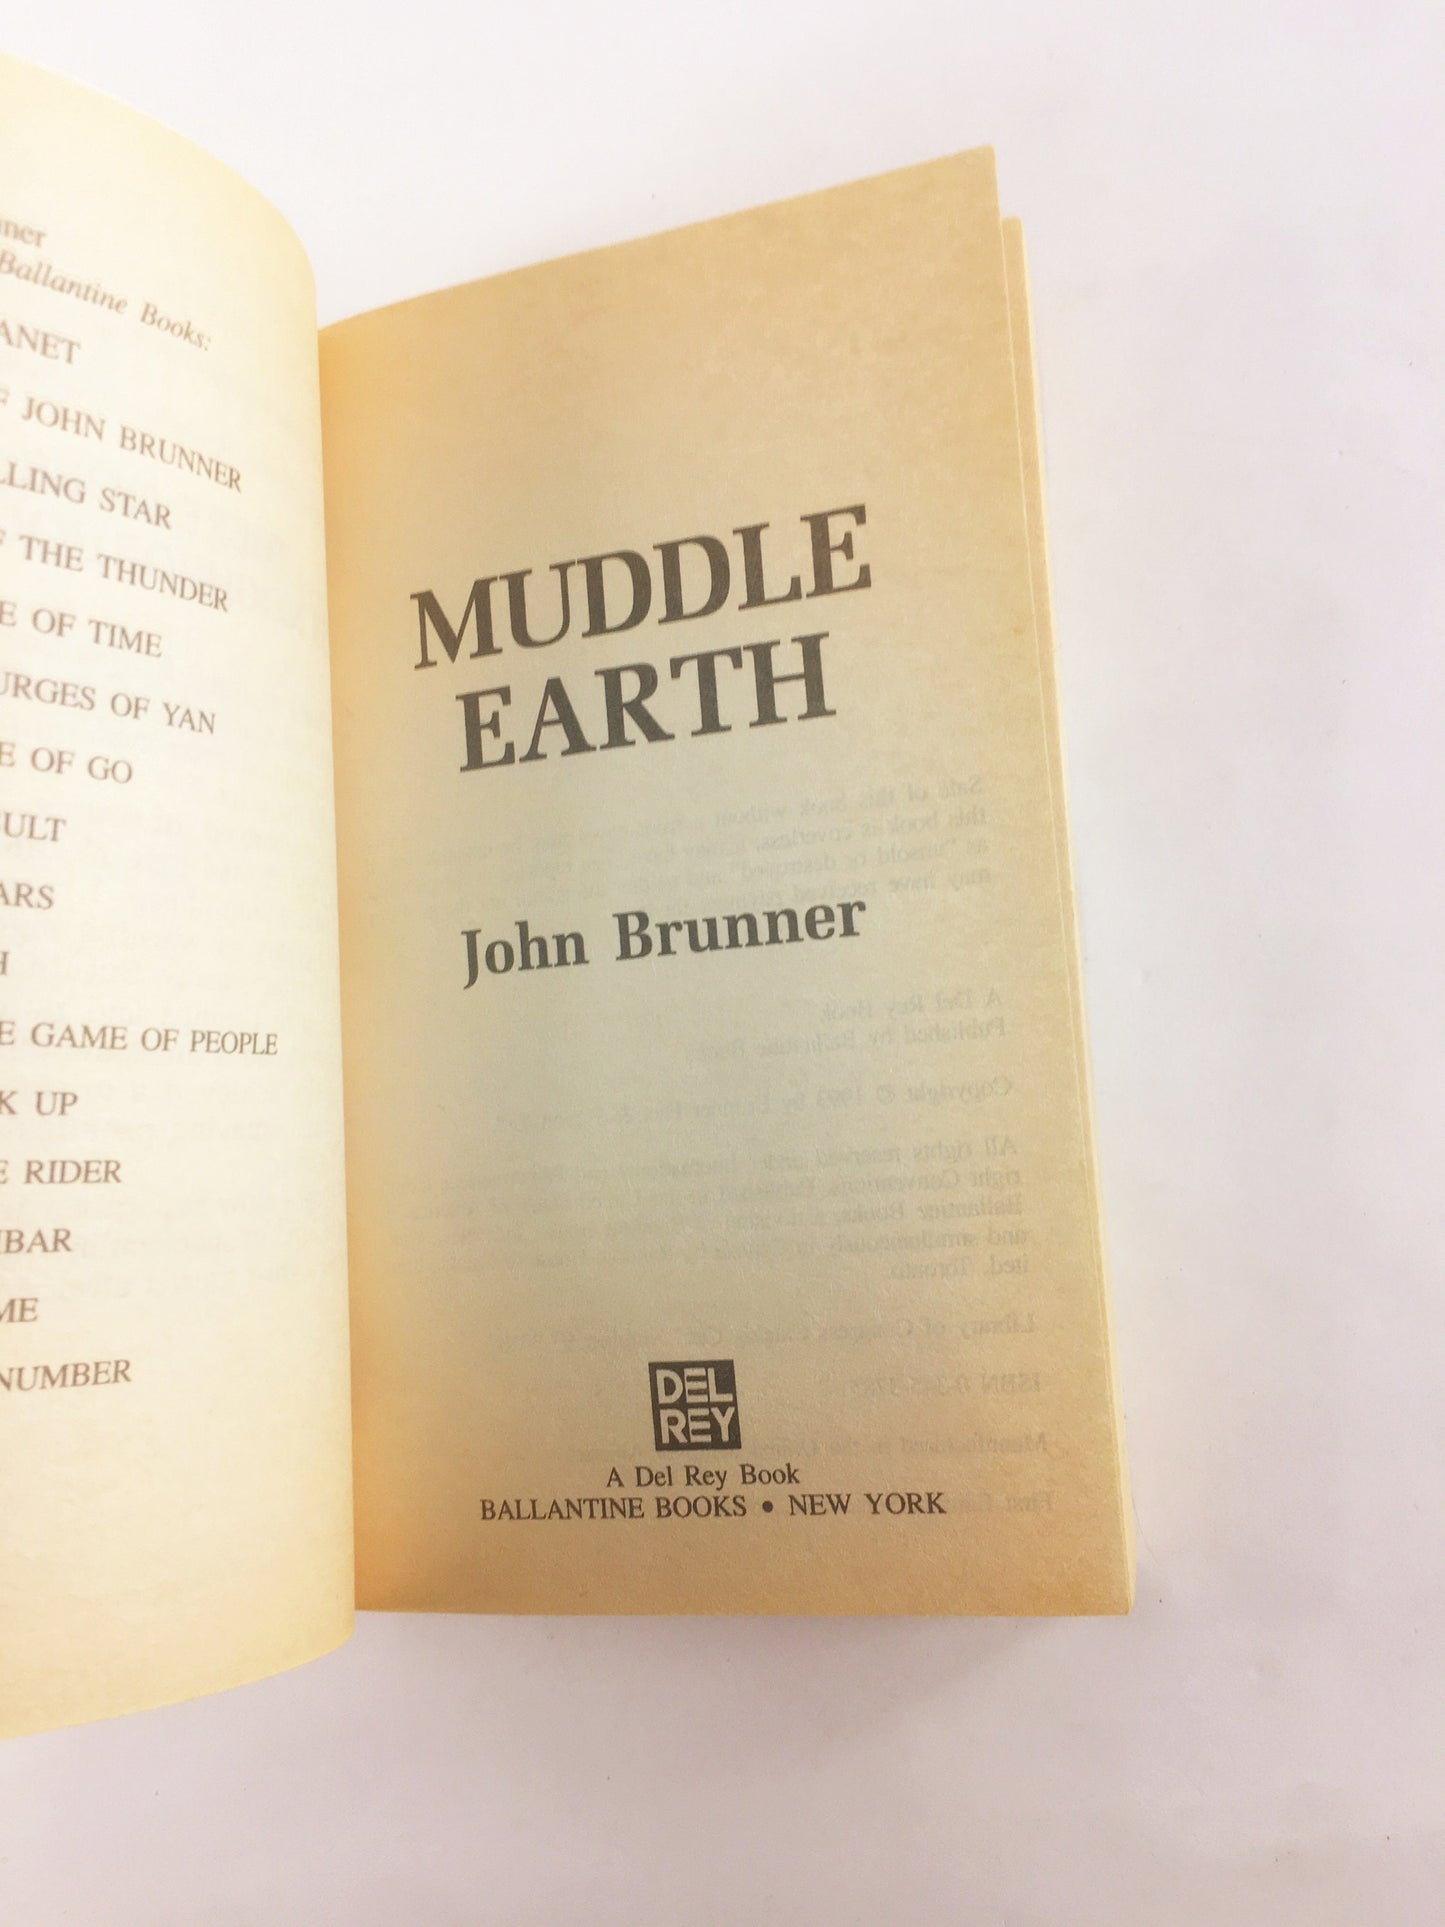 1993 Muddle Earth by John Brunner Science fiction book a man awakened from cryogenic suspension in the 24th century. Time Travel